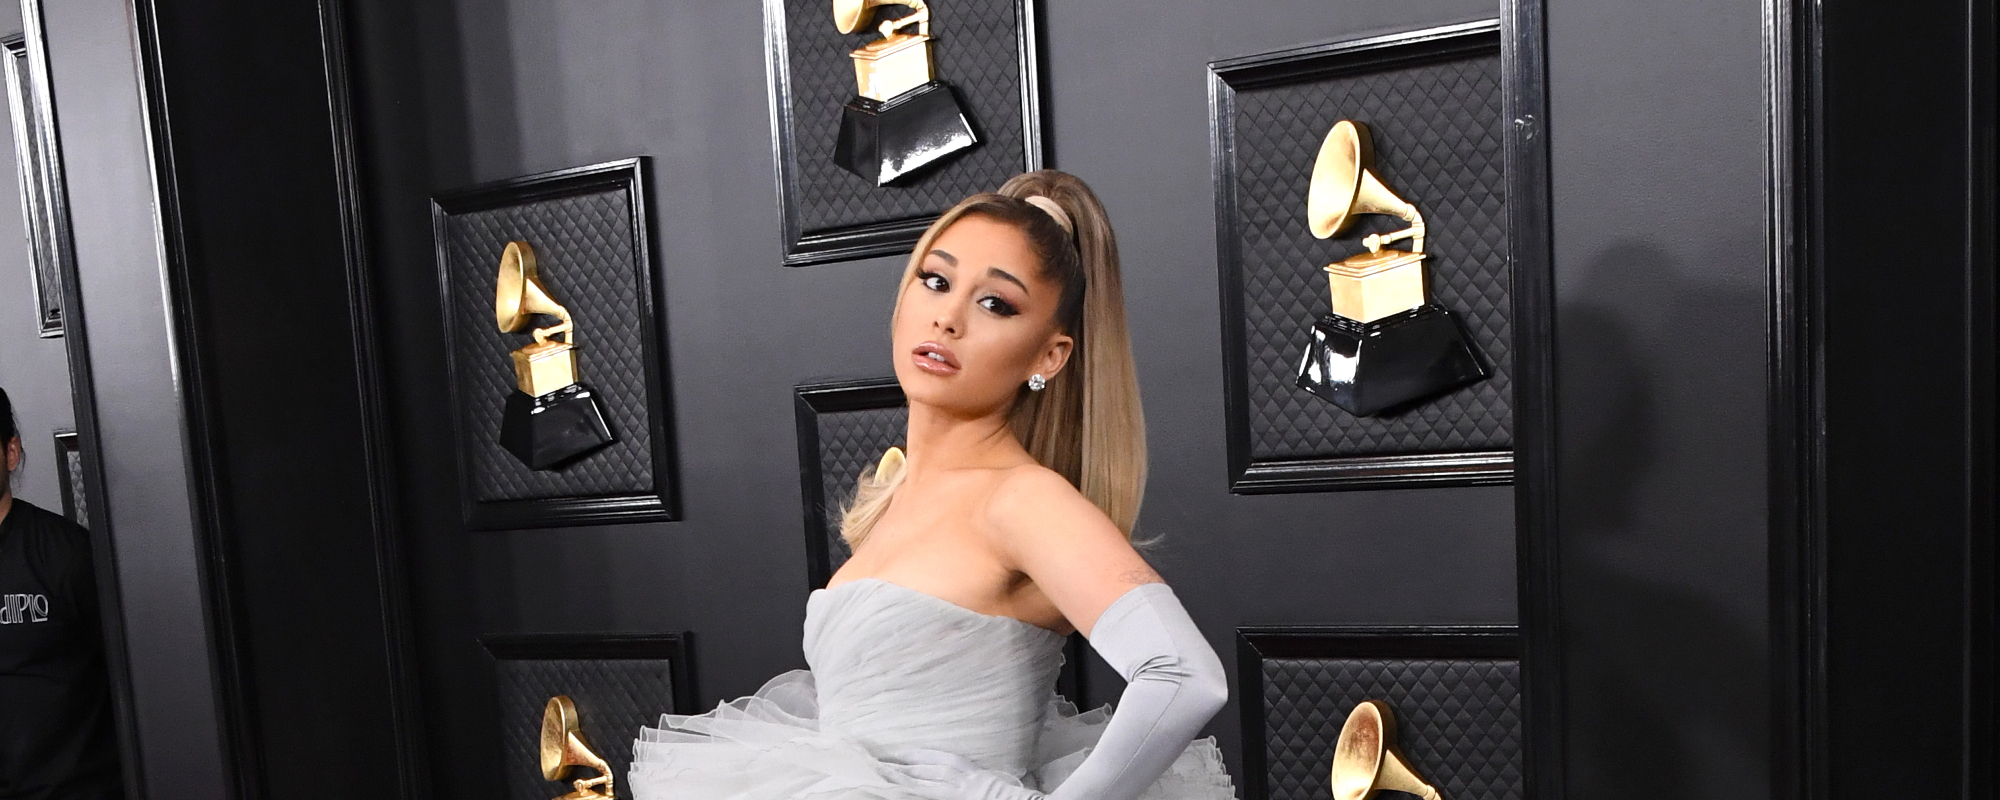 Ariana Grande’s ‘Wicked’ Co-Star Shares Sneak Peek Into New ‘AG7’ Album, Says Everyone Will Be Left “Gagged”